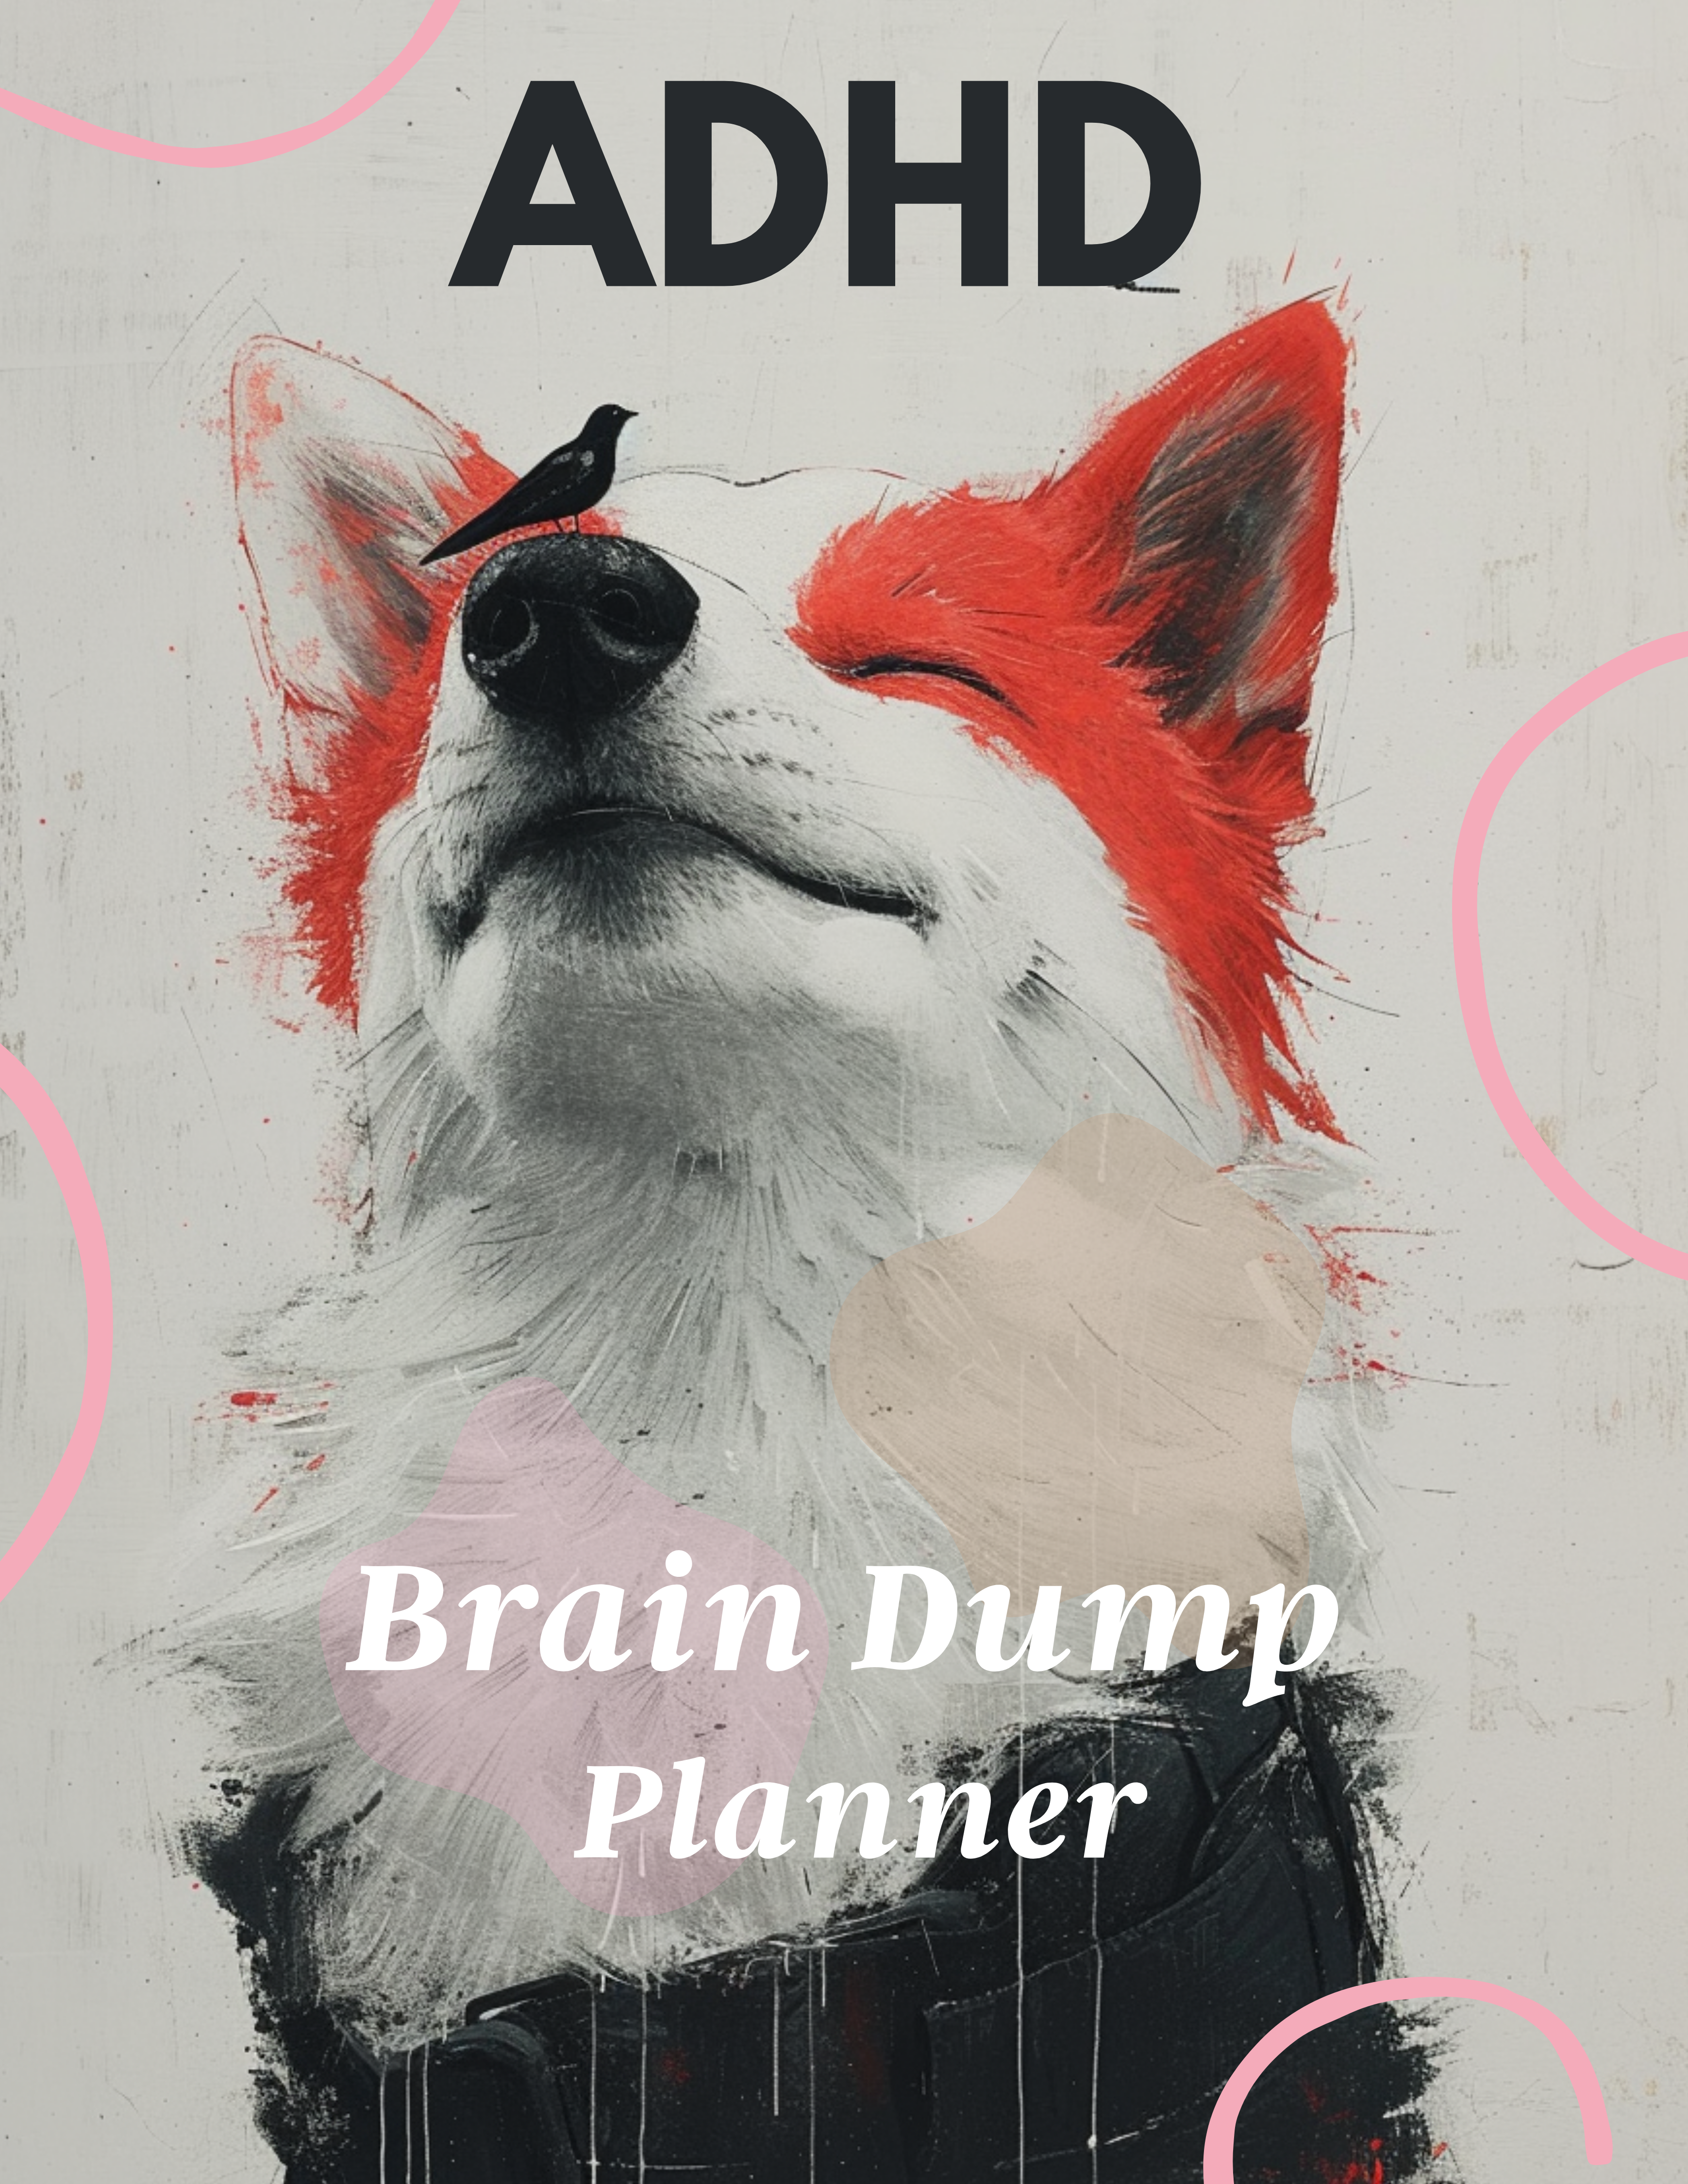 Great for Improving Memory and Cognitive Function for All Ages. ADHD Brain Dump Planner - 66 Pages of Organization, Focus, and Clarity for Managing ADHD